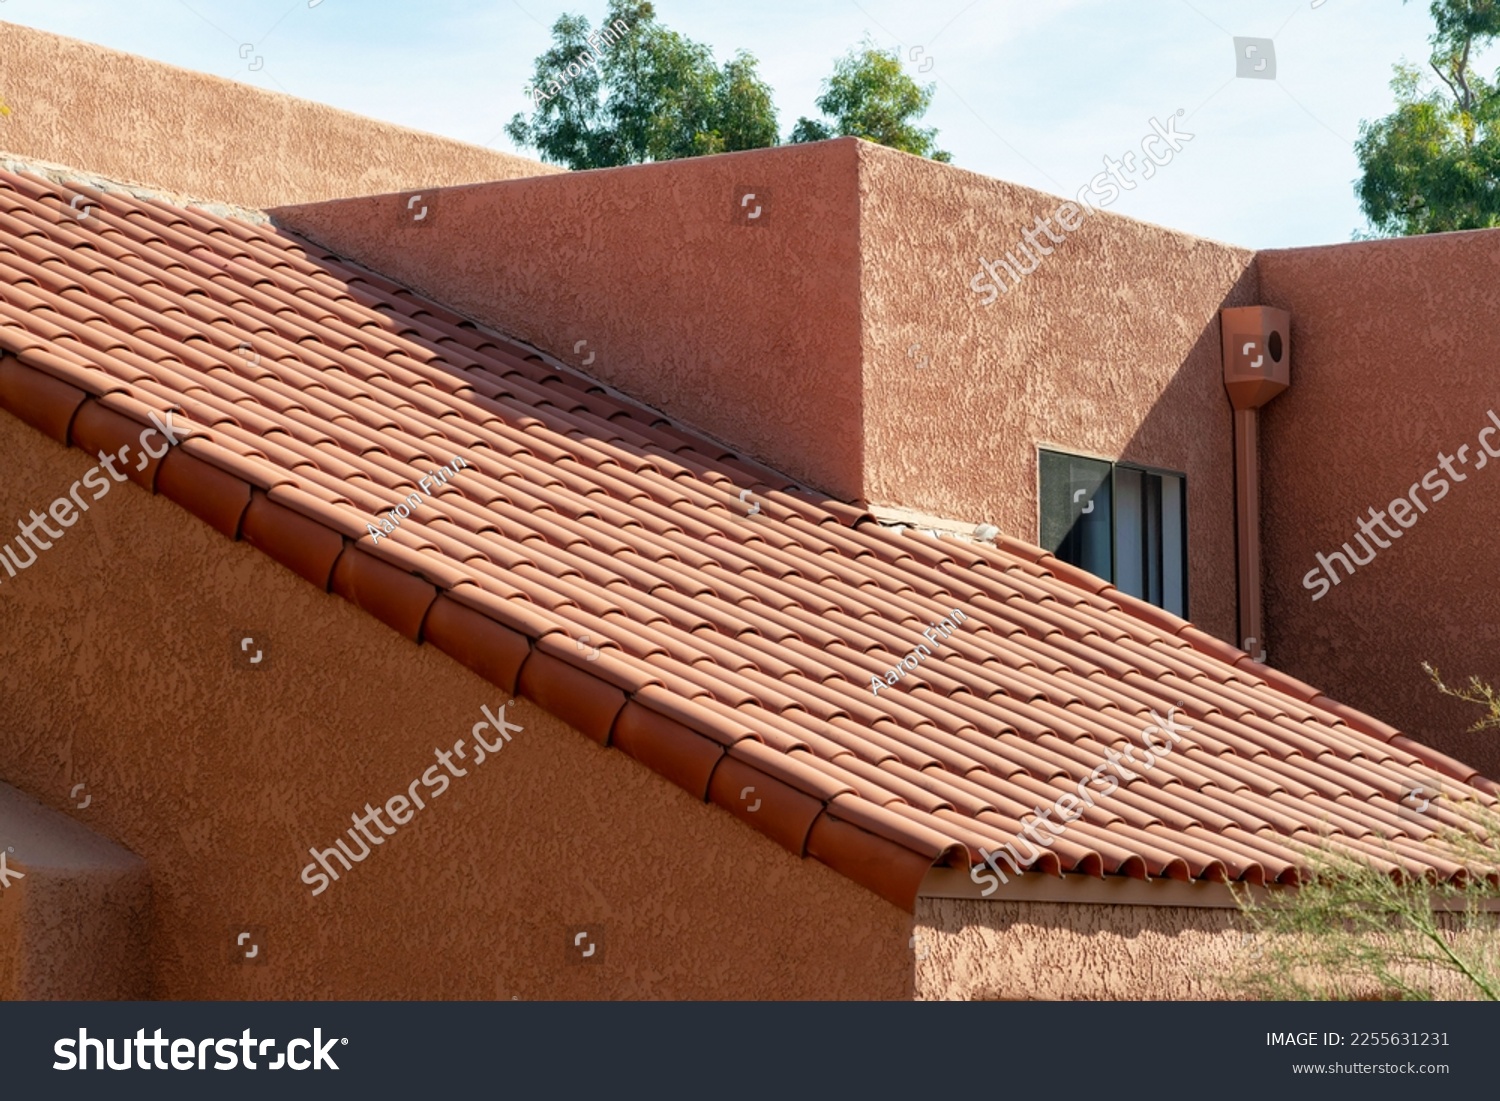 Long slanted adobe style roof with red tiles and orange stucco exterior with back and front yard trees in a neighborhood. In suburban area in late afternoon sun with desert design and facade. #2255631231